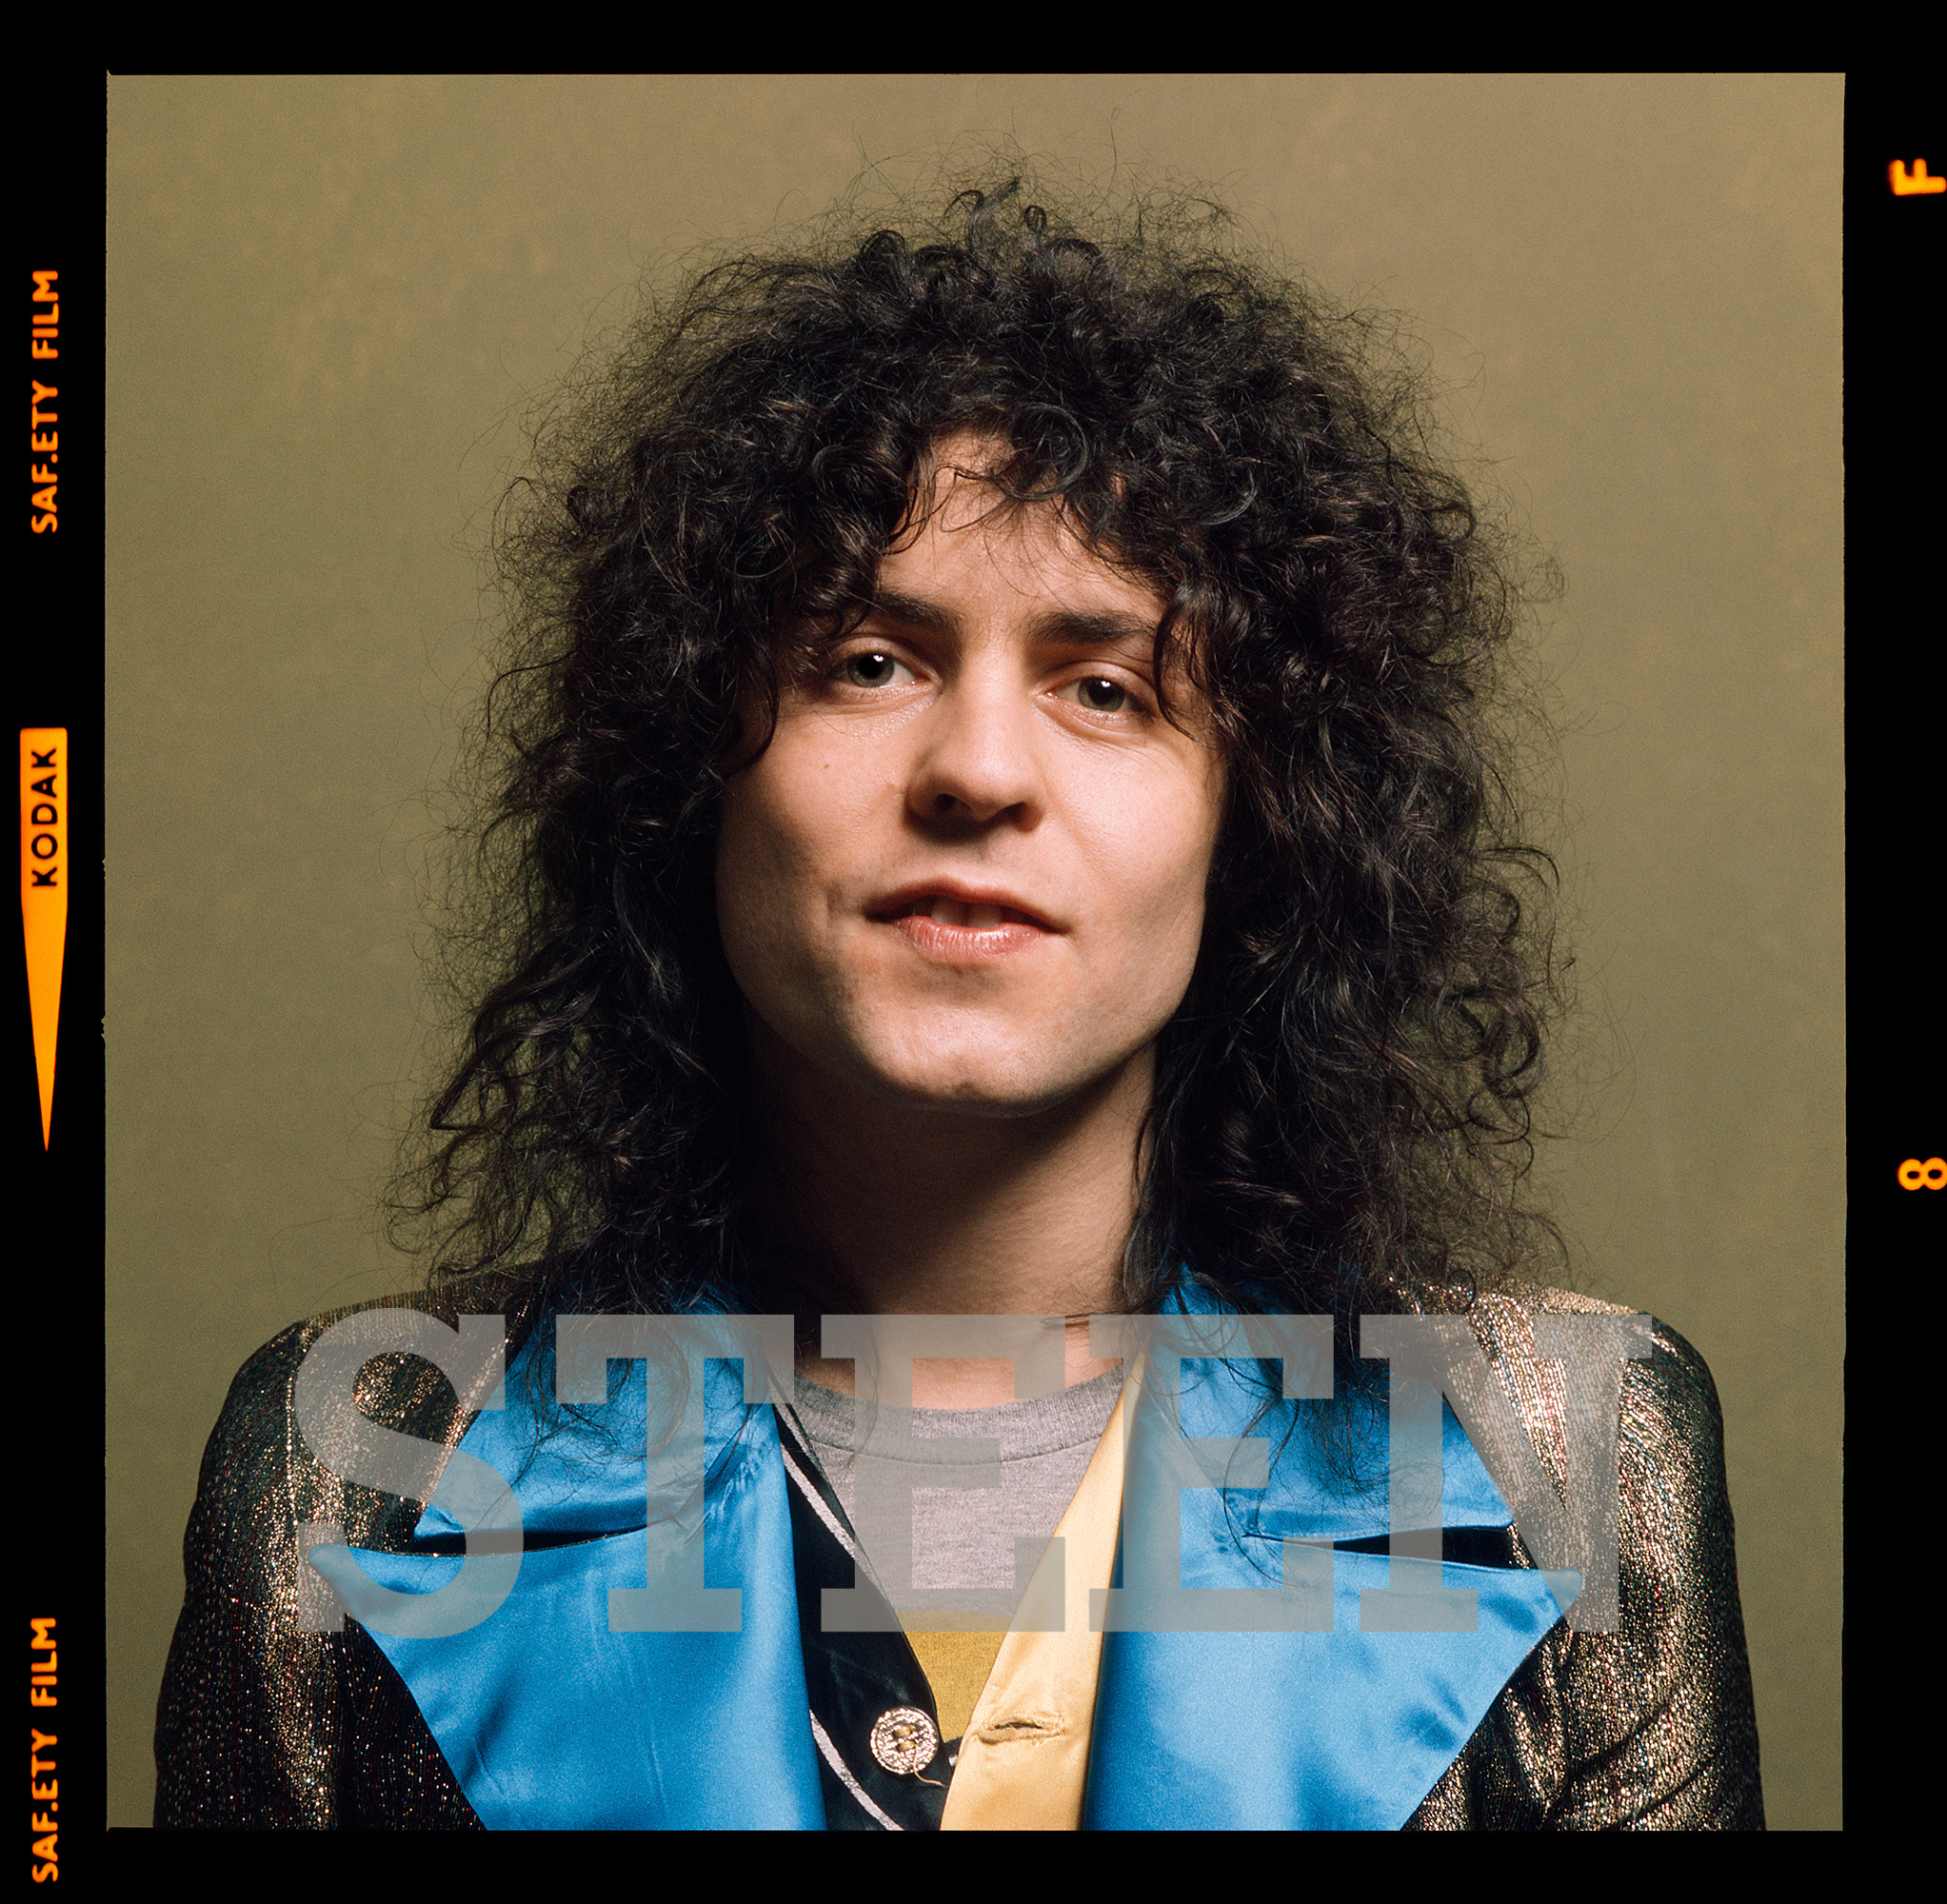 an exclusive limited edition photograph of T-Rex rock star marc bolan by celebrity photographer david steen